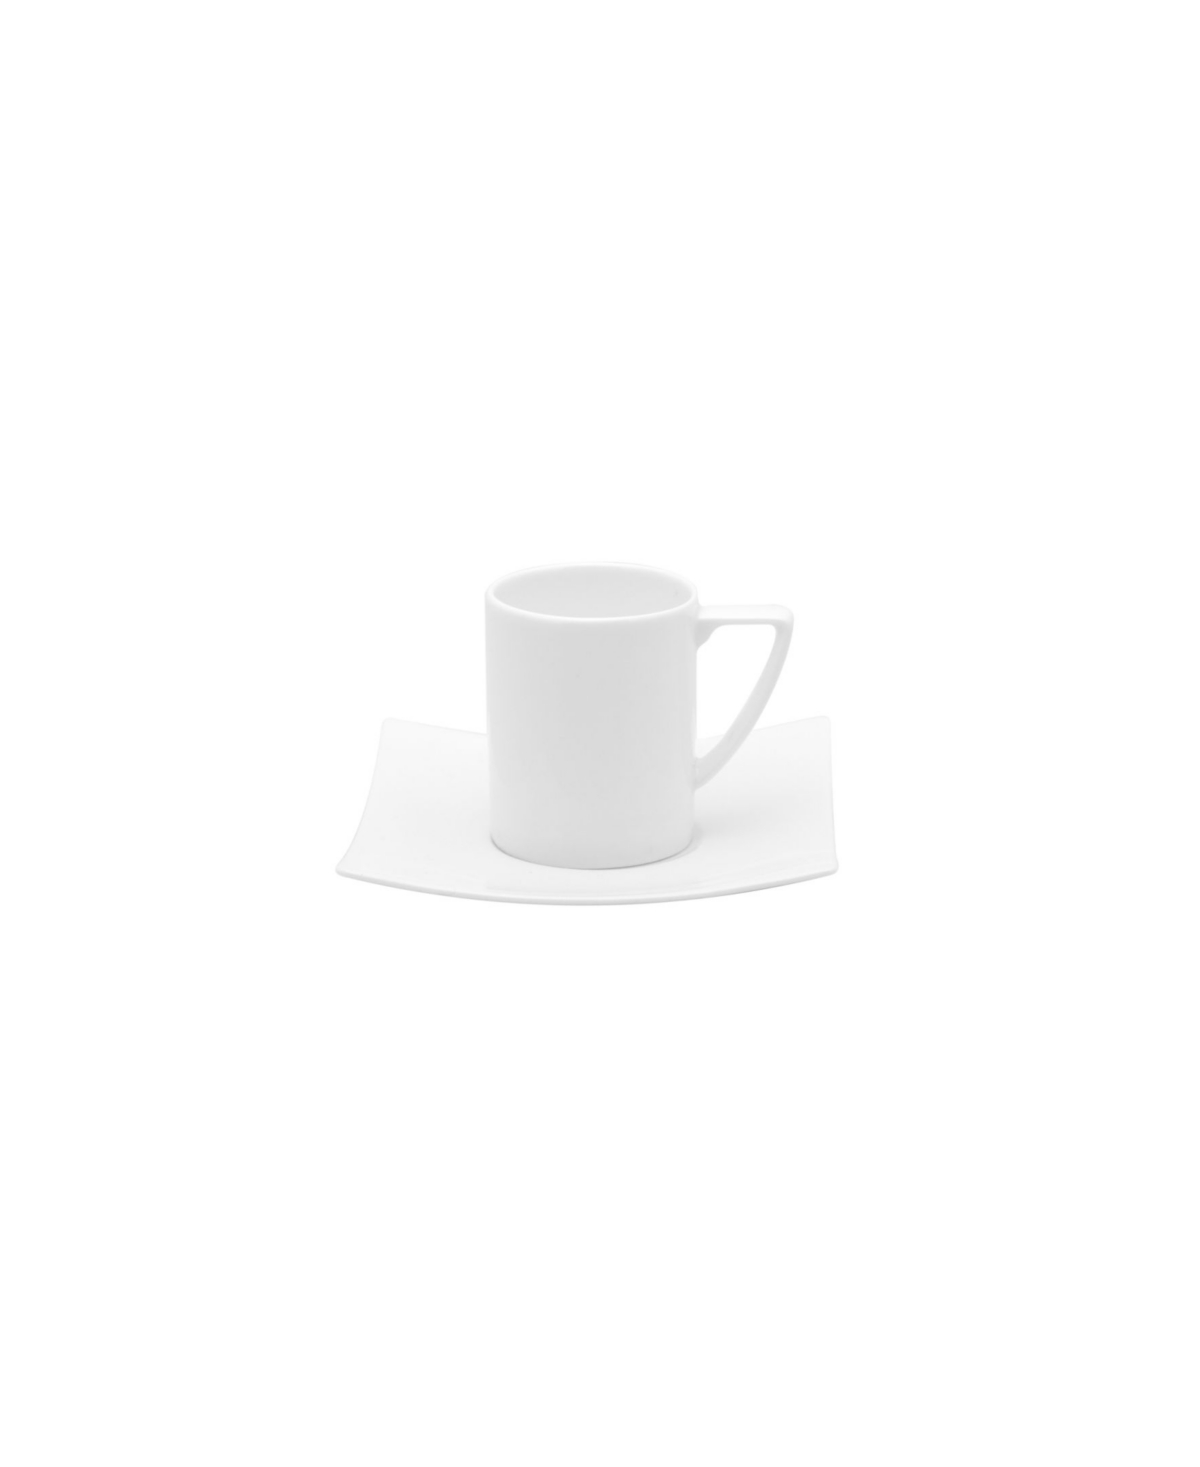 Extreme 4.5" Espresso Cup and Saucer Set - White